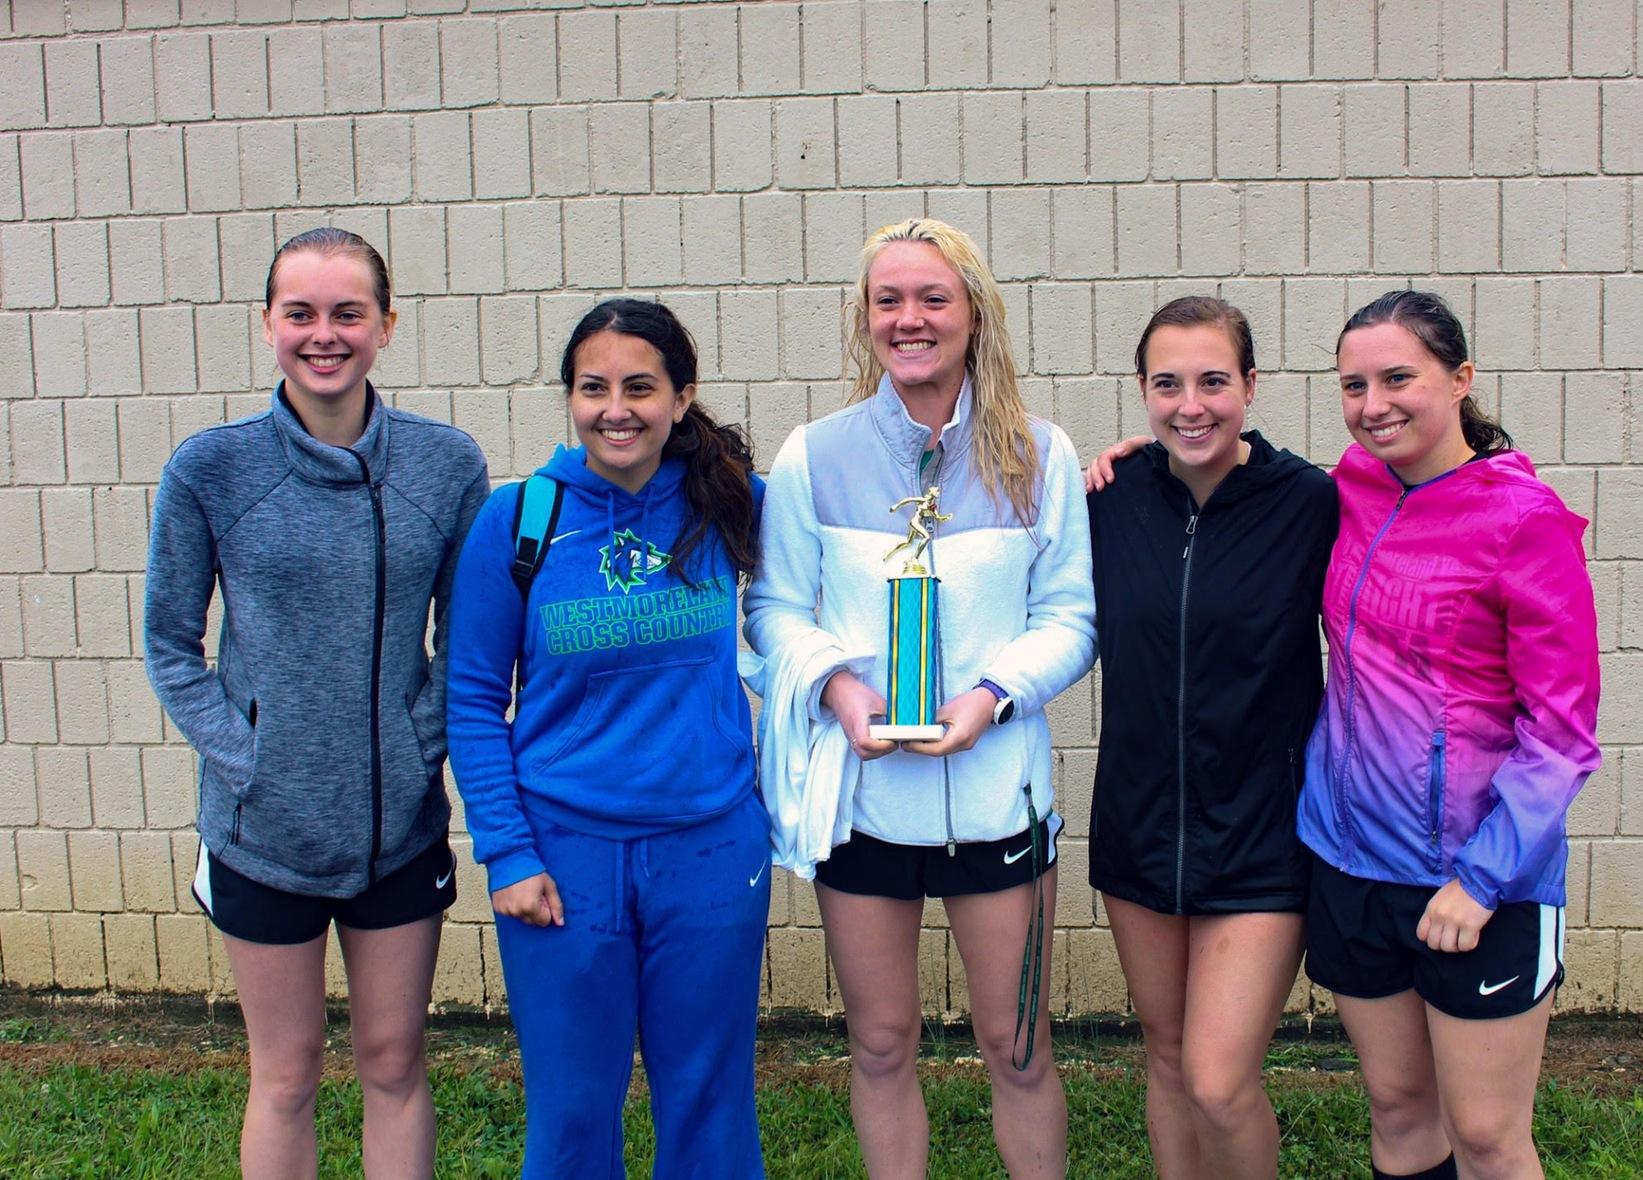 Chelsi Bartlow (center in white) with her Wolfpack cross country teammates who won the WPCC title in the fall. Bartlow earned the Westmoreland Country YWCA Sportswoman of the Year for Individual Excellence.